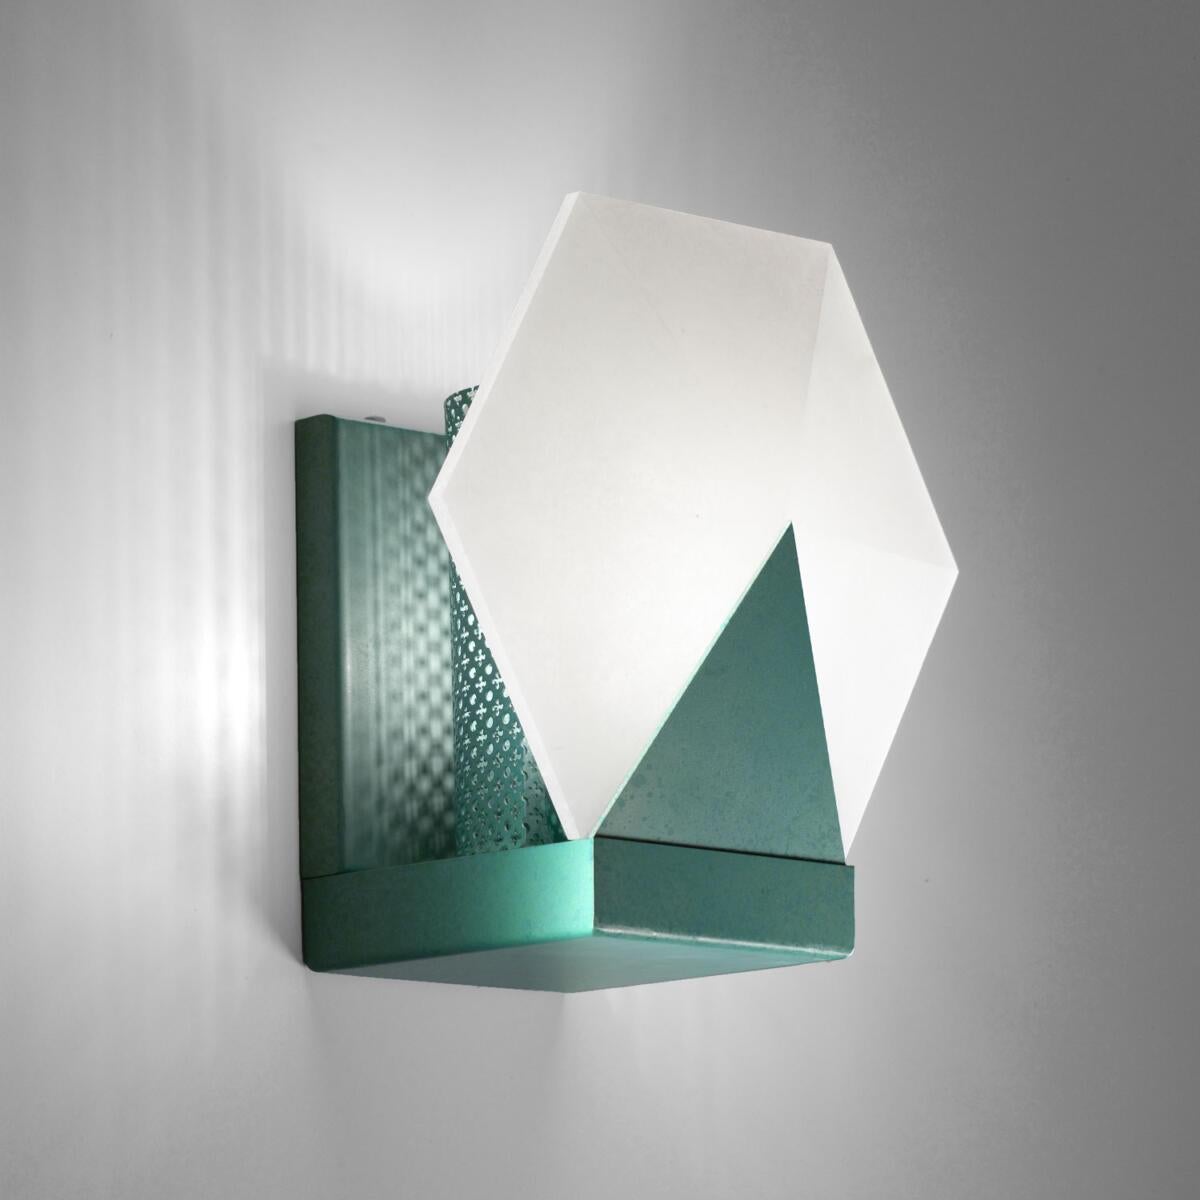 Wall lamp Artemide by Alabastro Italiano
Dimensions: W 25 x D 17 x H 26 cm
Materials: Italian white alabaster, Italian iron, freedom green
Other finishes available. 
Light Source 1 x E27 LED 11 Watt, Tot. 1050 Lumen, 3000 k, 220 V

All our